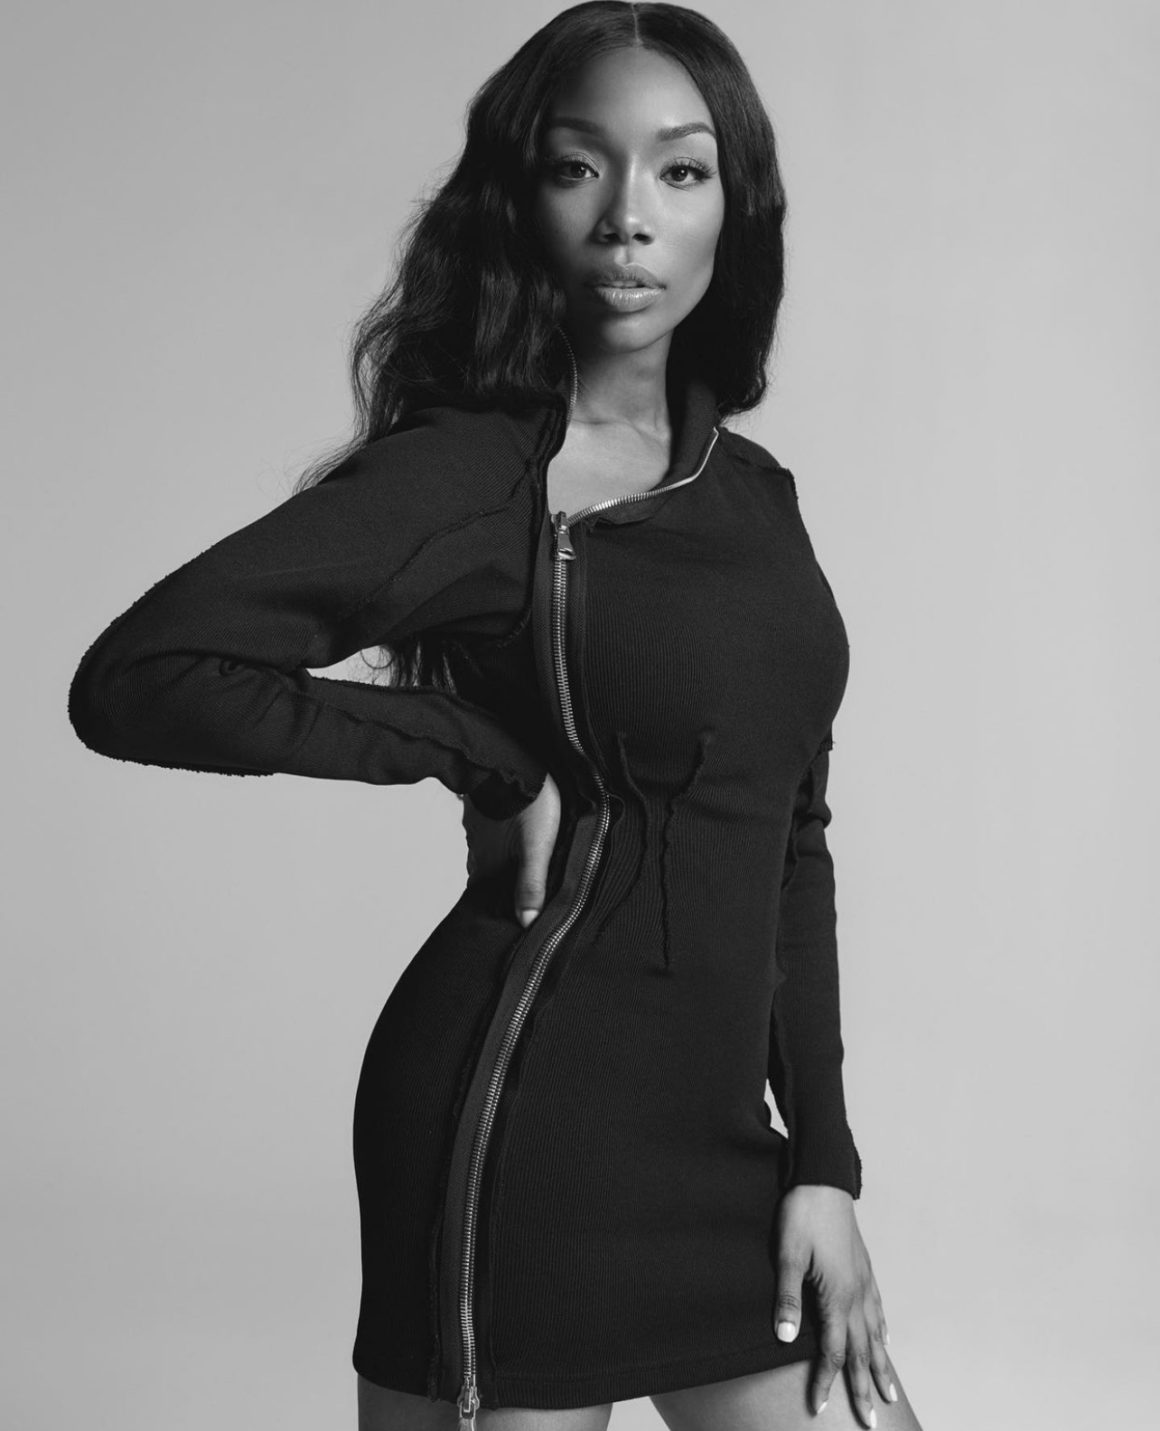 Brandy Stuns in Black and White Photoshoot Wearing Lionne Clothing Black Long Sleeve Zip Up Mini Dress and Femme LA Black Lace Up Sandals3